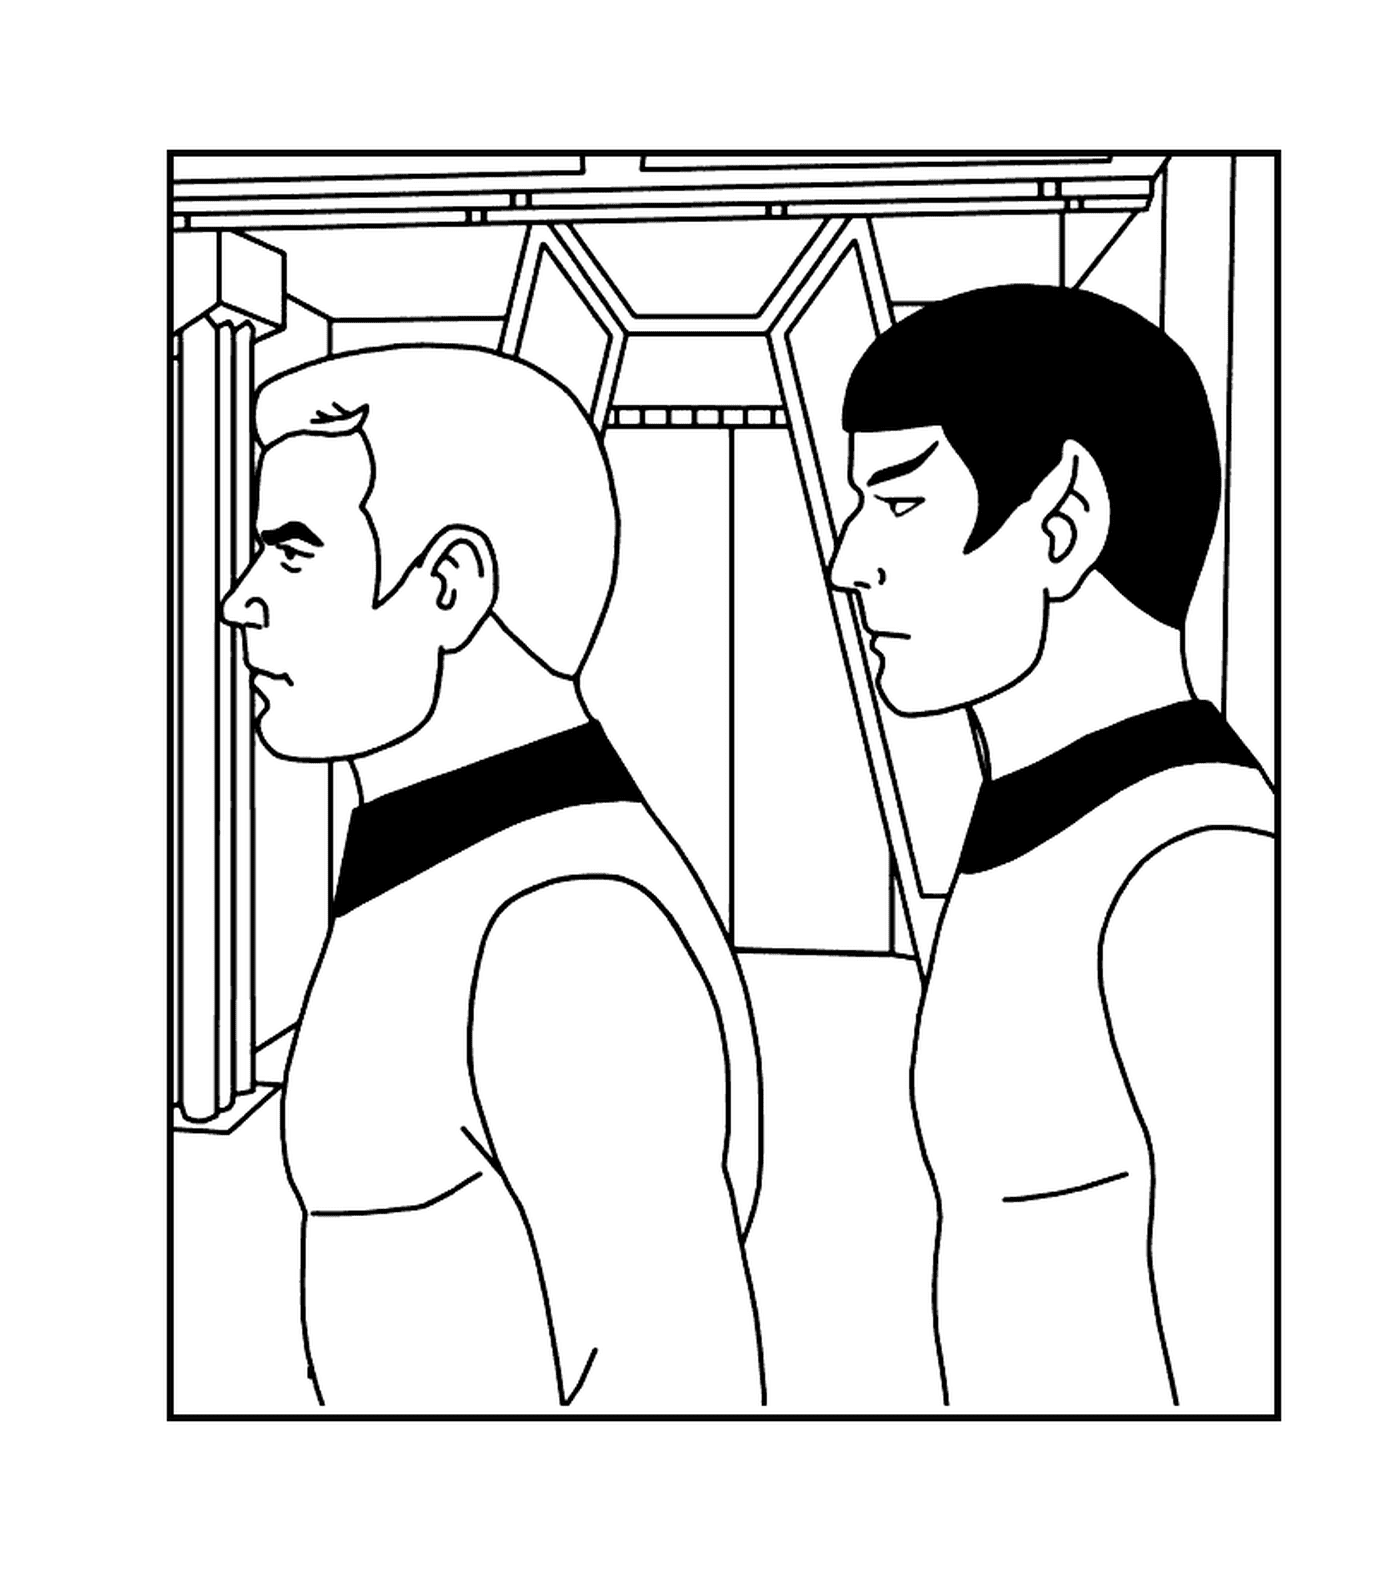  Spock and Kirk by Star Trek 星际迷航 星际迷航 星际迷航 星际迷航 星际迷航 星际迷航 星际迷航 星际迷航 星际迷航 星际迷航 星际迷航 星际迷航 星际迷航 星际迷航 星际迷航 星际迷航 Spock and Kirk by Star Trek 